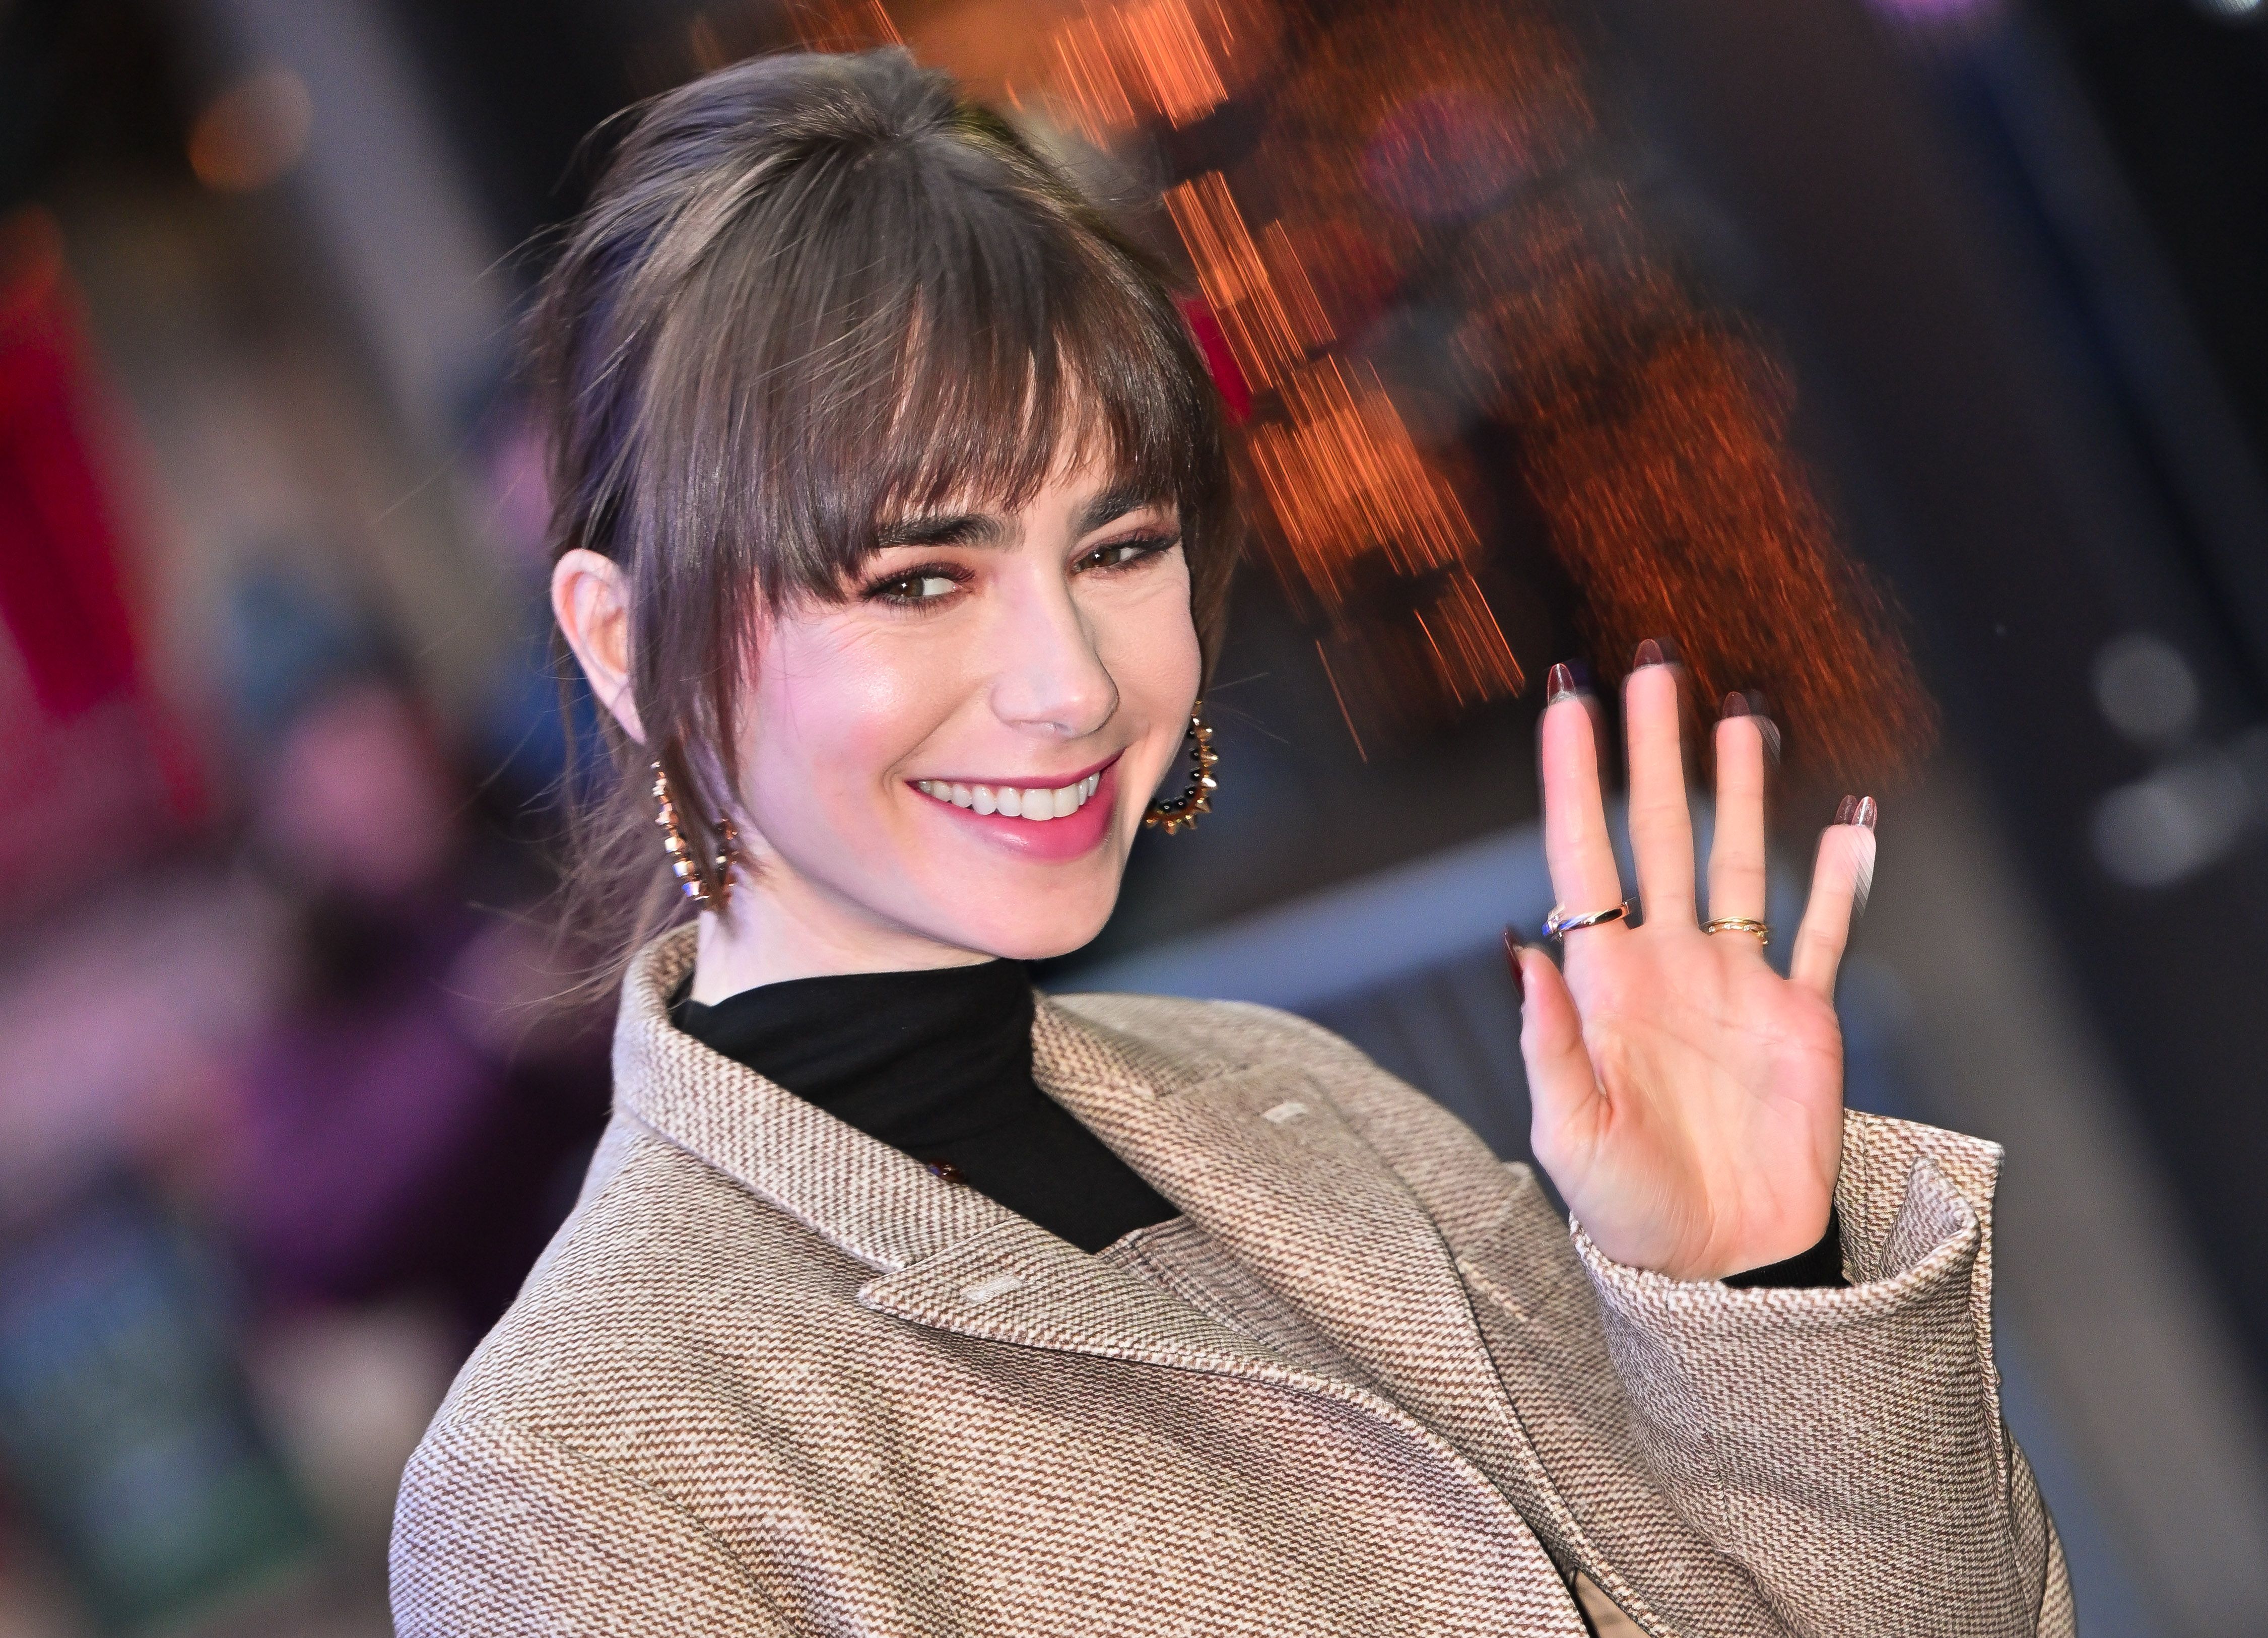 Lily Collins' hairstylist cuts her 'Emily in Paris' bangs: video